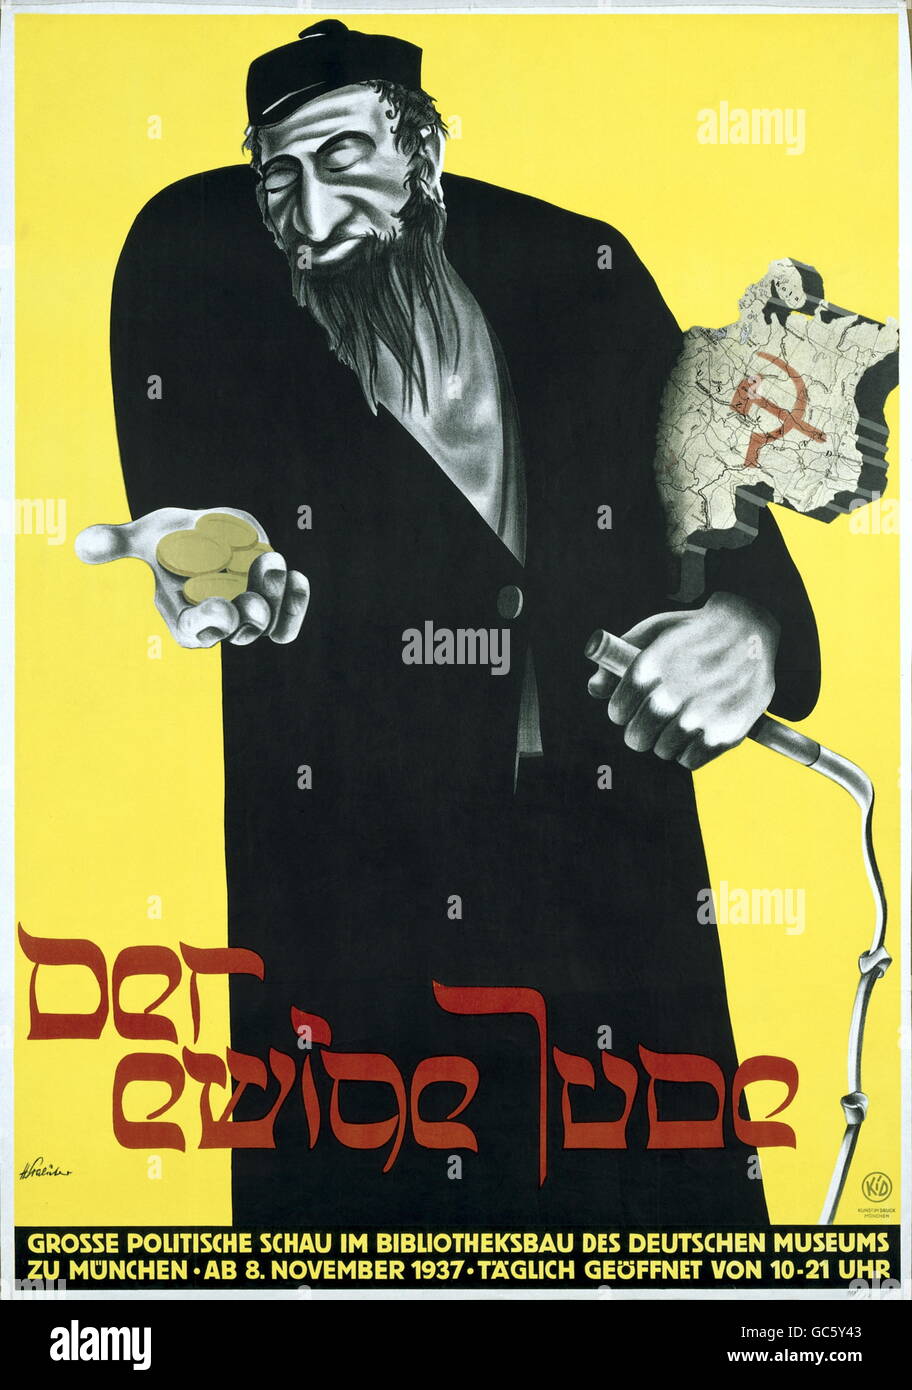 Nazism / National Socialism, crimes, persecution of Jews, antisemitic propaganda, 'Der ewige Jude' (The Wandering Jew), poster of the exhibition at German Museum, Munich, Germany, 8.11.1937, , Additional-Rights-Clearences-Not Available Stock Photo